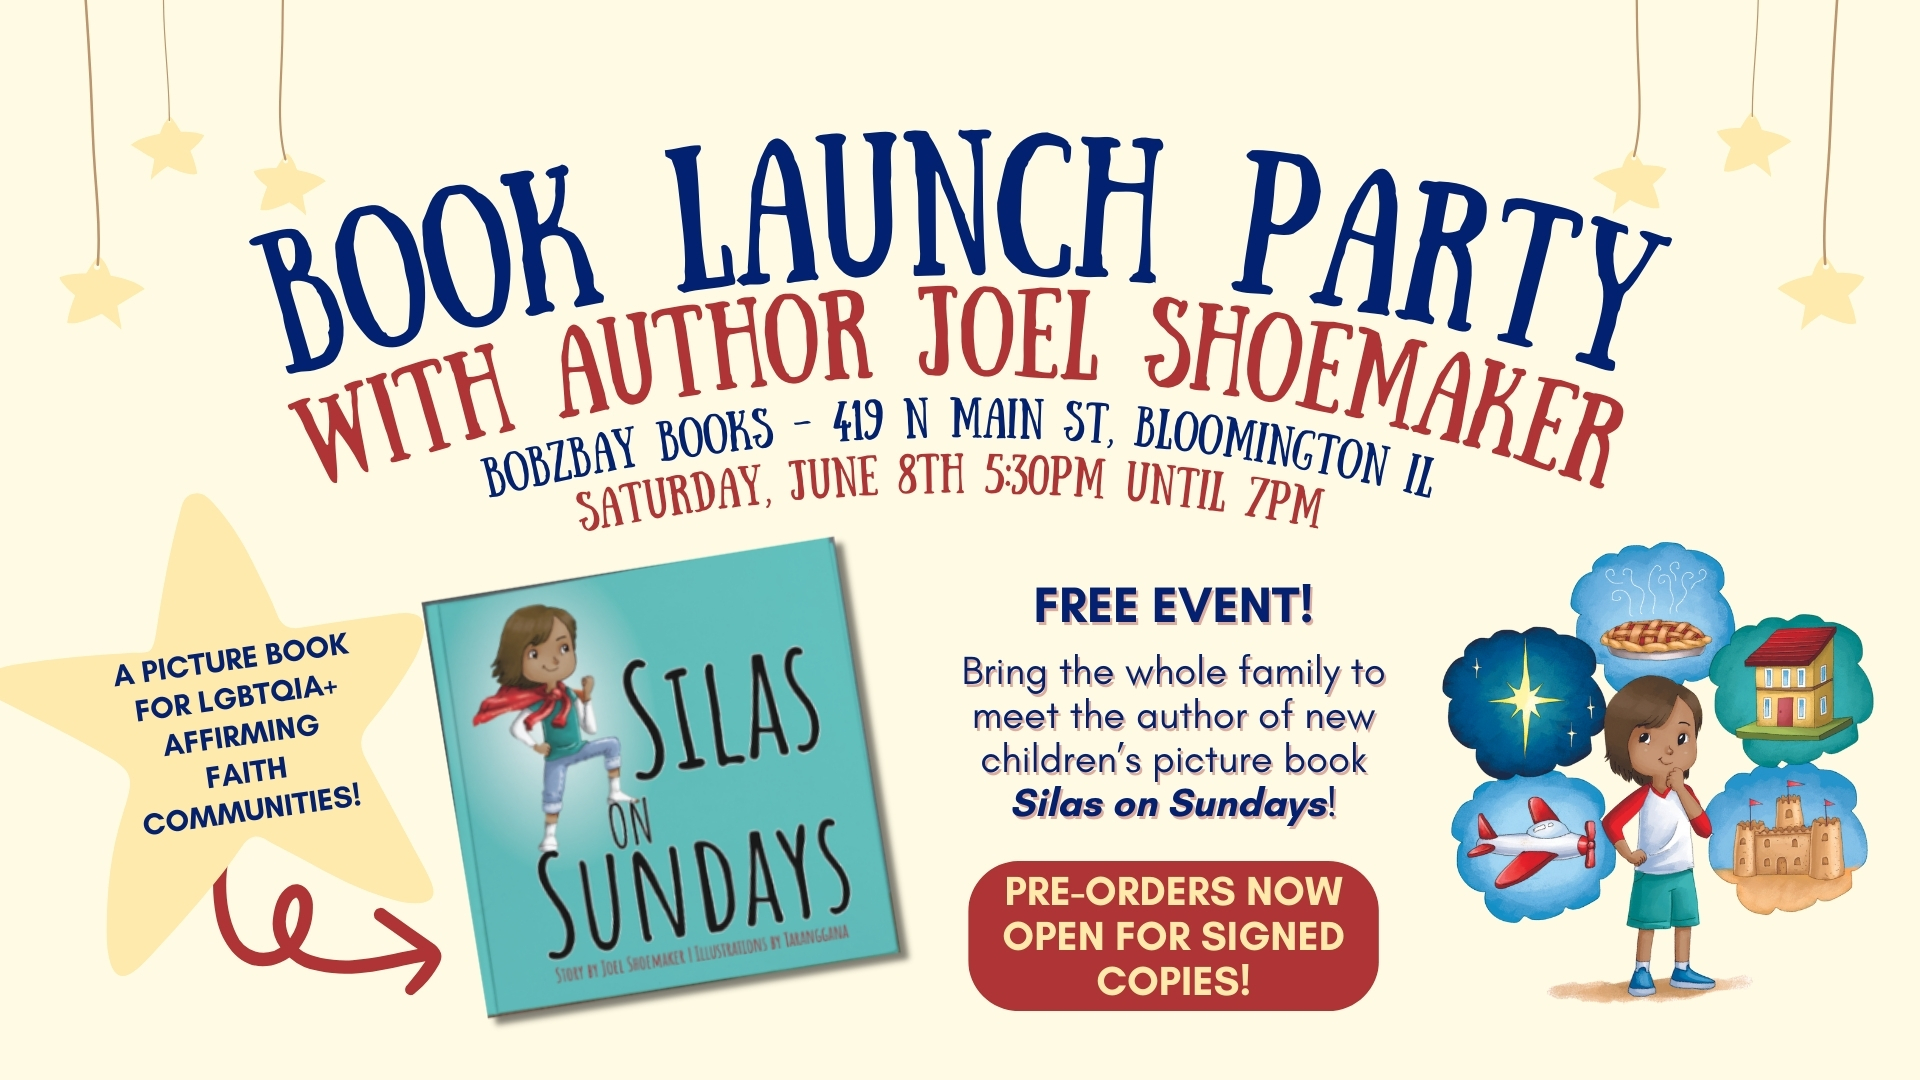 Book Launch Party with Illinois Author Joel Shoemaker at Bobzbay Books